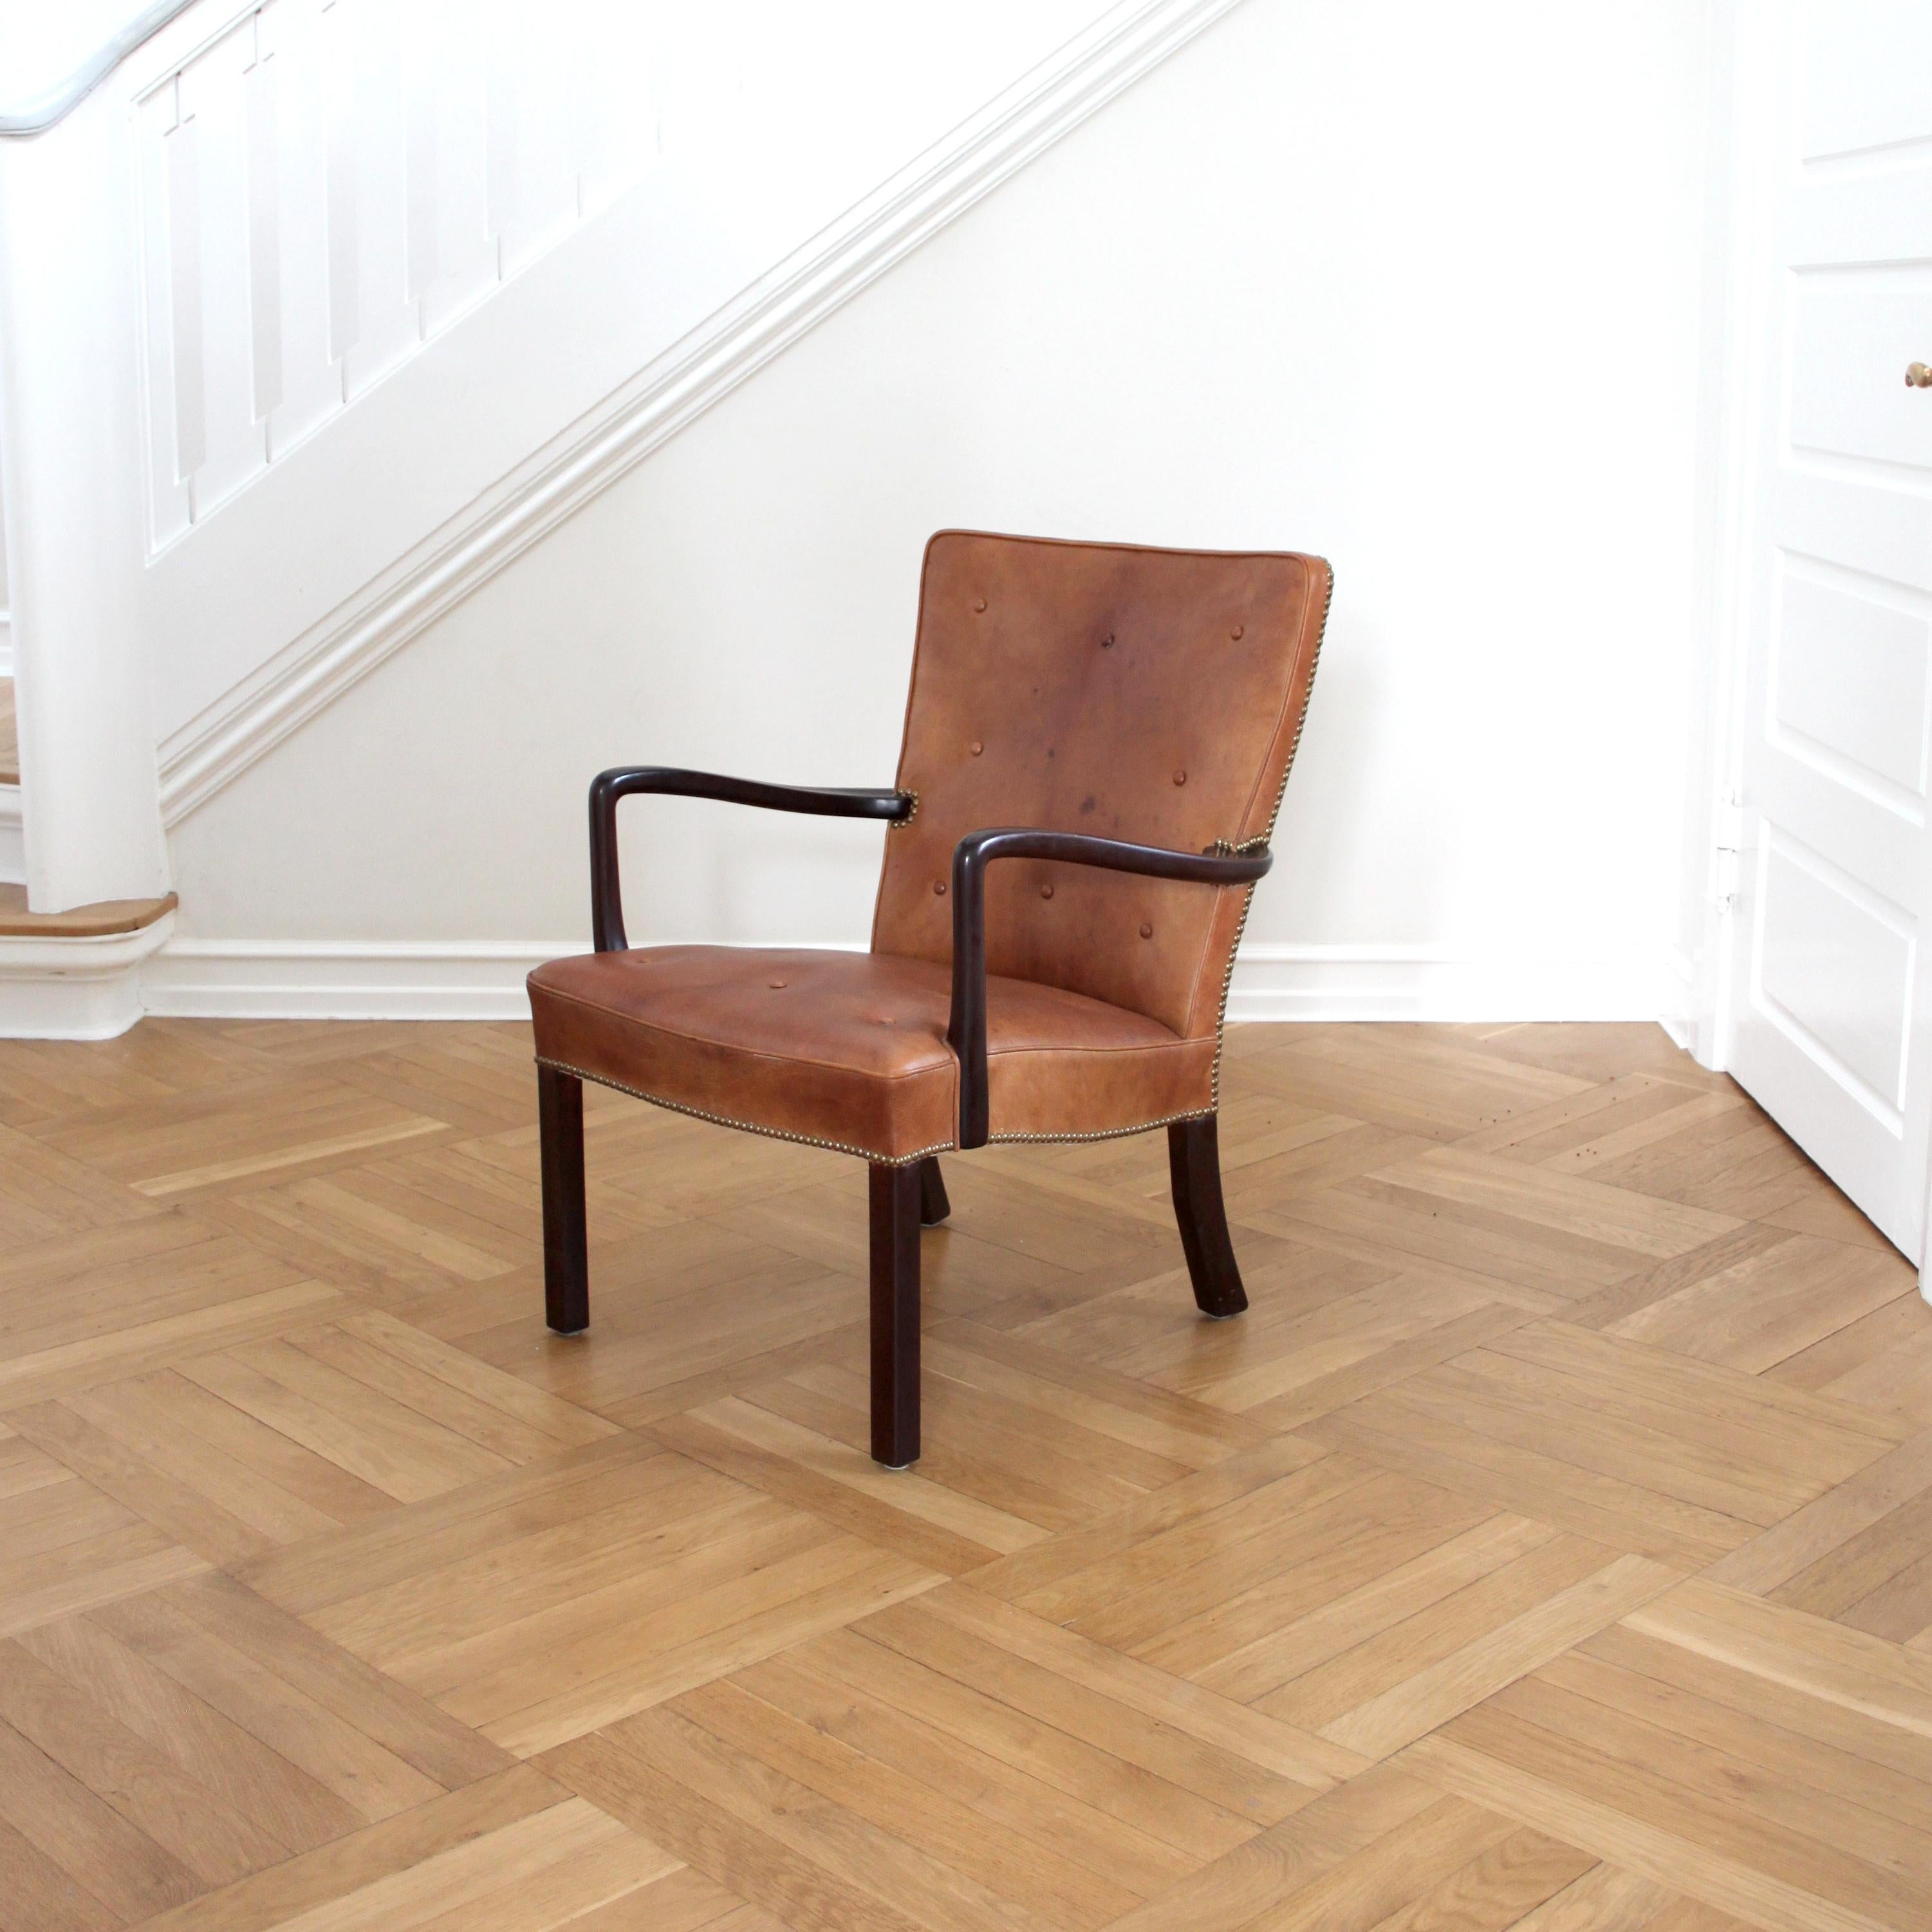 Pair of Jacob Kjær Lounge Chairs in Dark Stained Mahogany and Niger Leather 1